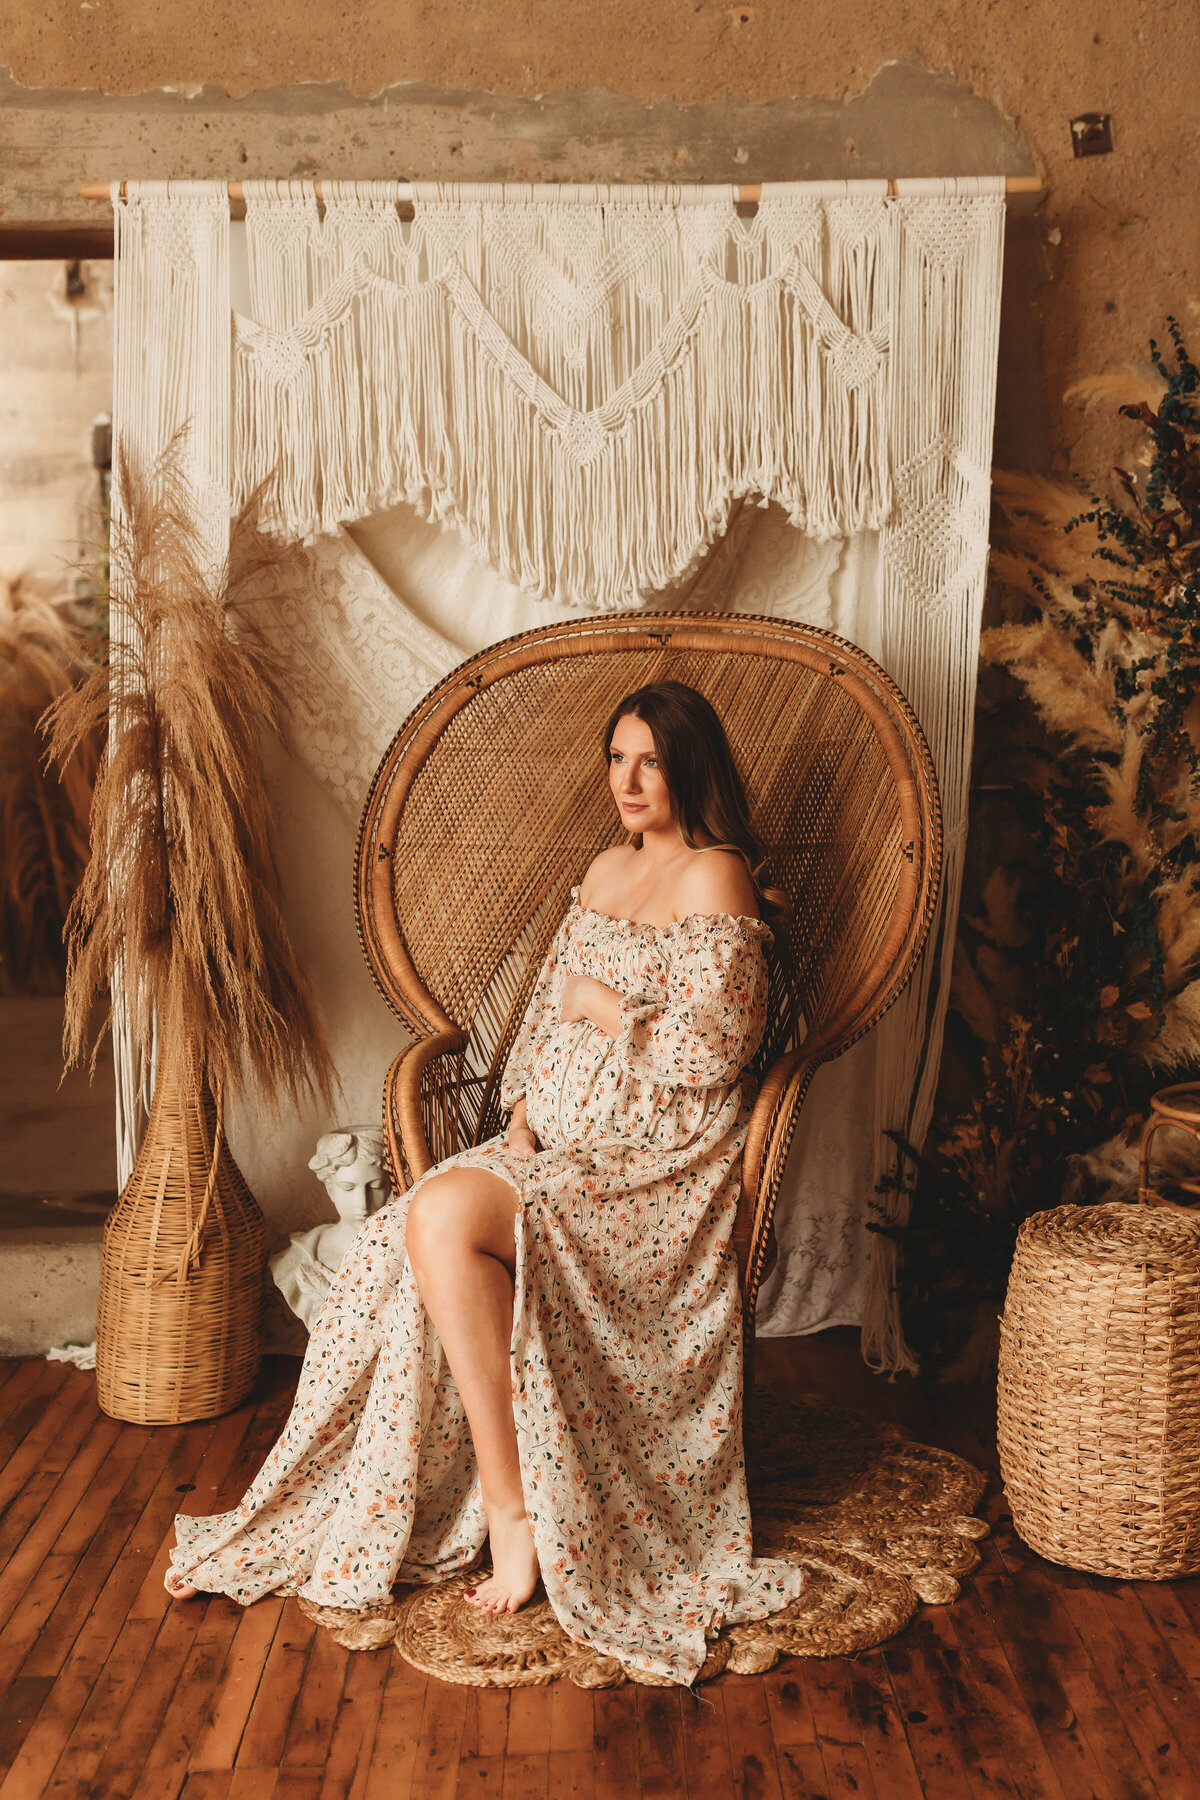 Expecting mother sits in a peacock chair wearing a beautiful floral dress at Dear Meraki Studio Dallas.